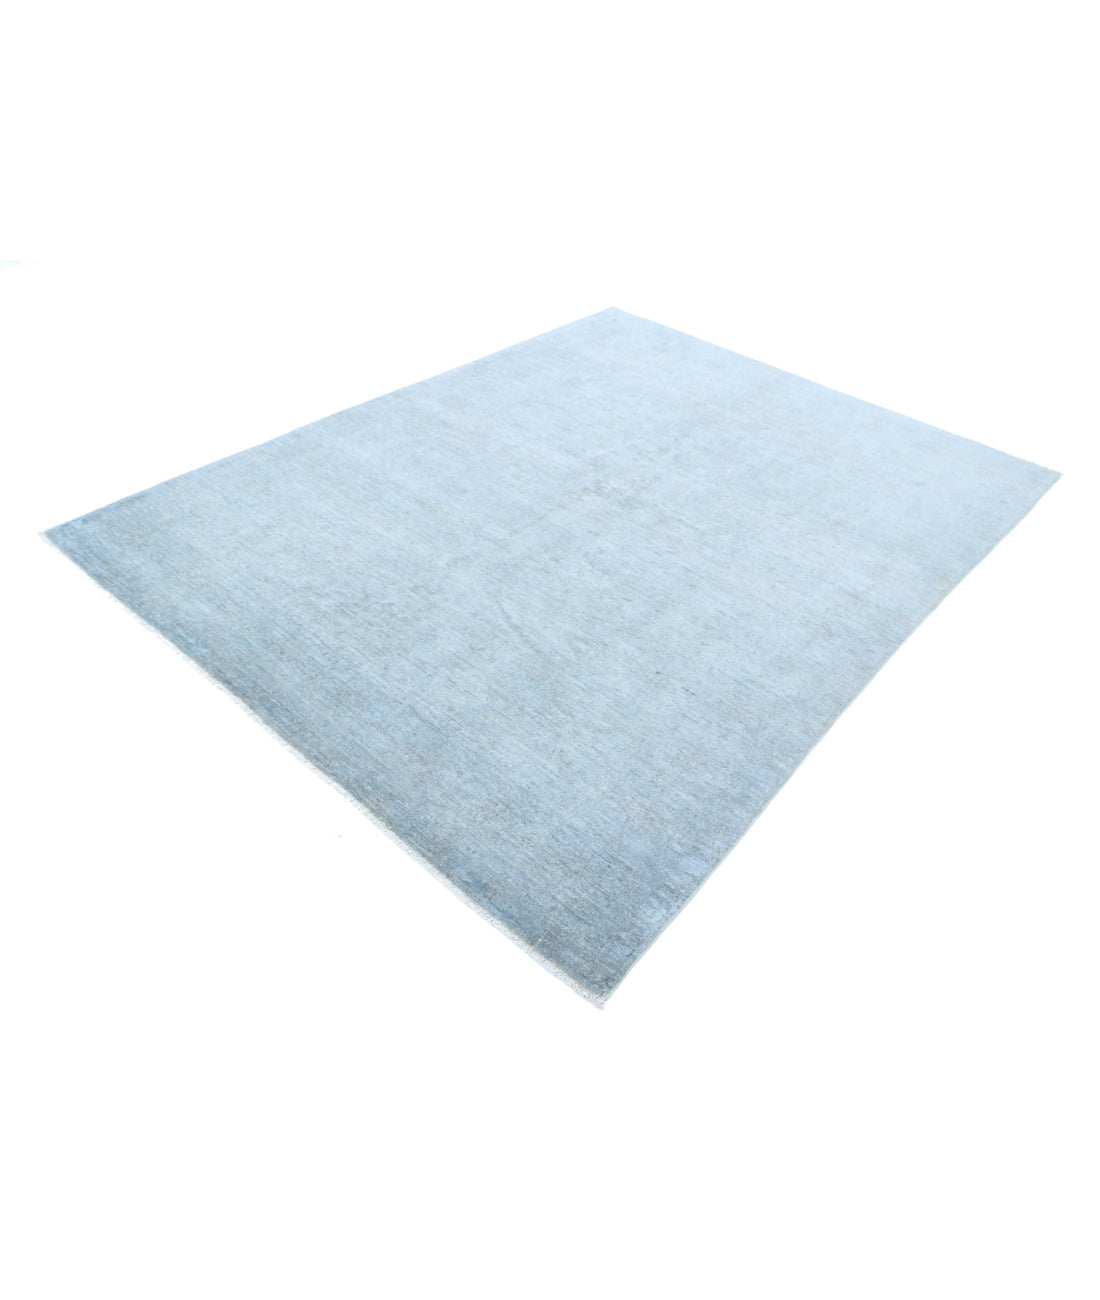 Hand Knotted Overdye Wool Rug - 6'1'' x 7'11'' 6'1'' x 7'11'' (183 X 238) / Grey / N/A